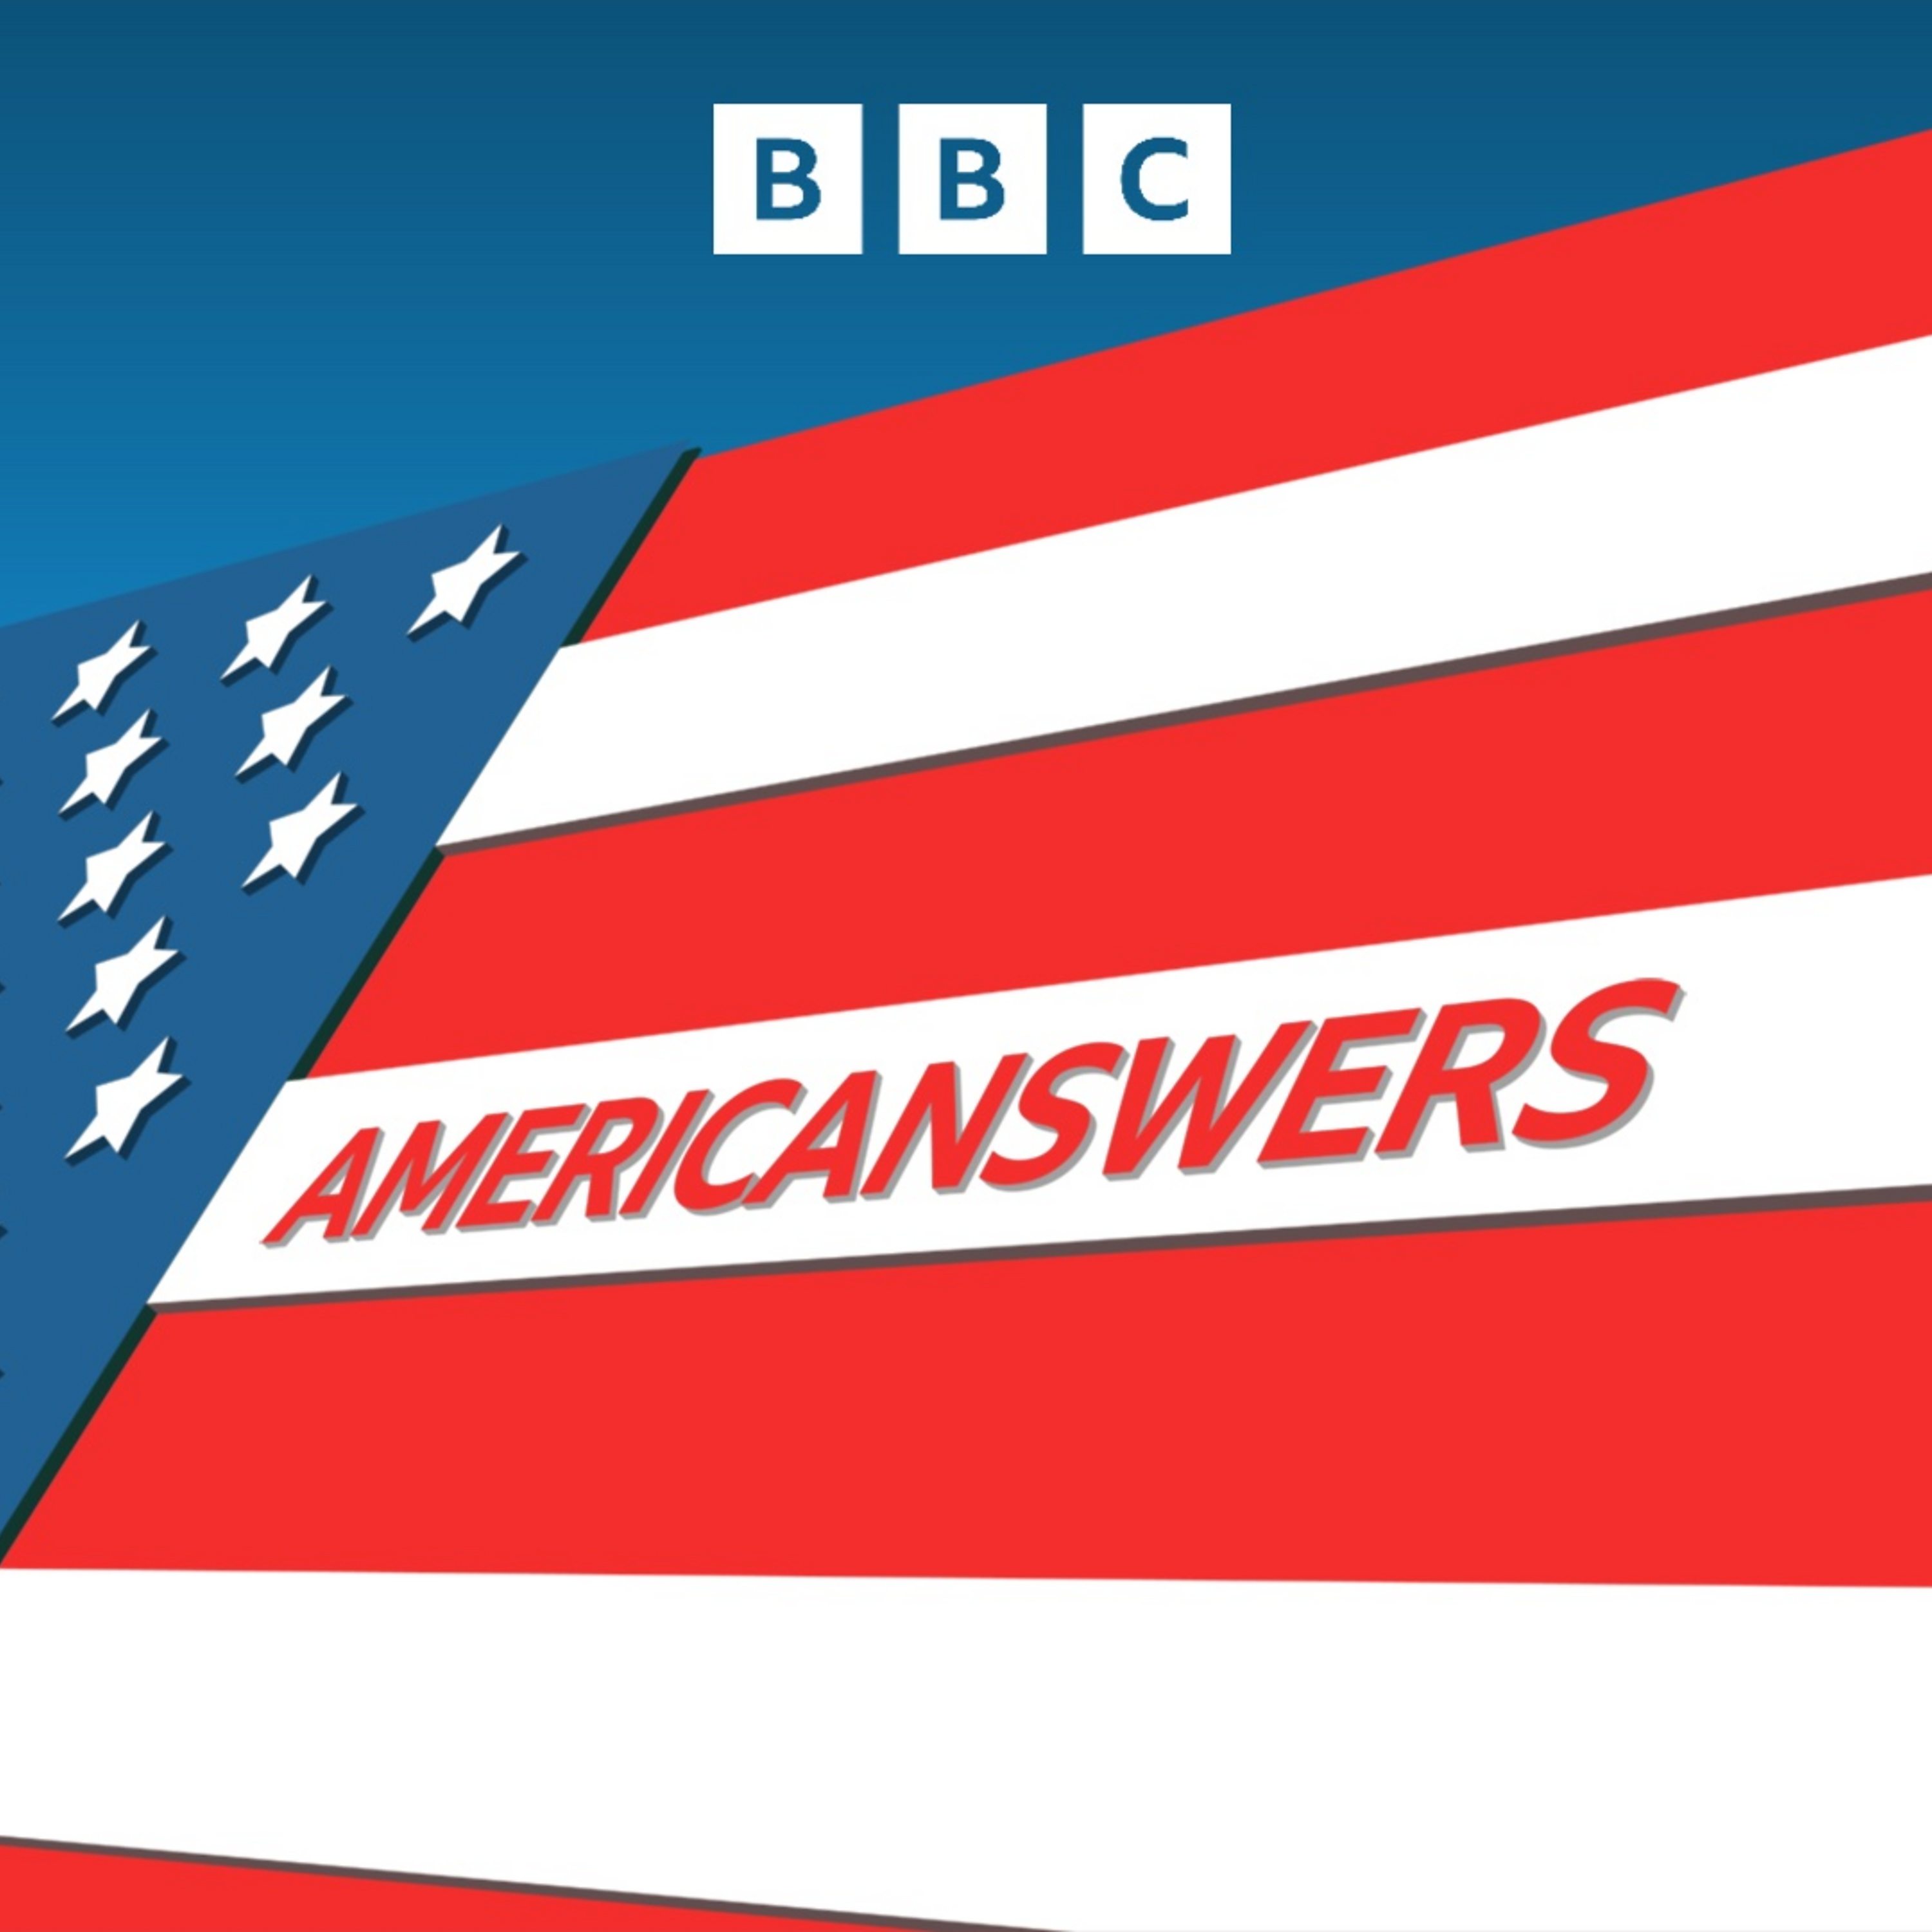 Americanswers! VP picks, Nikki Haley's back, and could Trump do three terms?